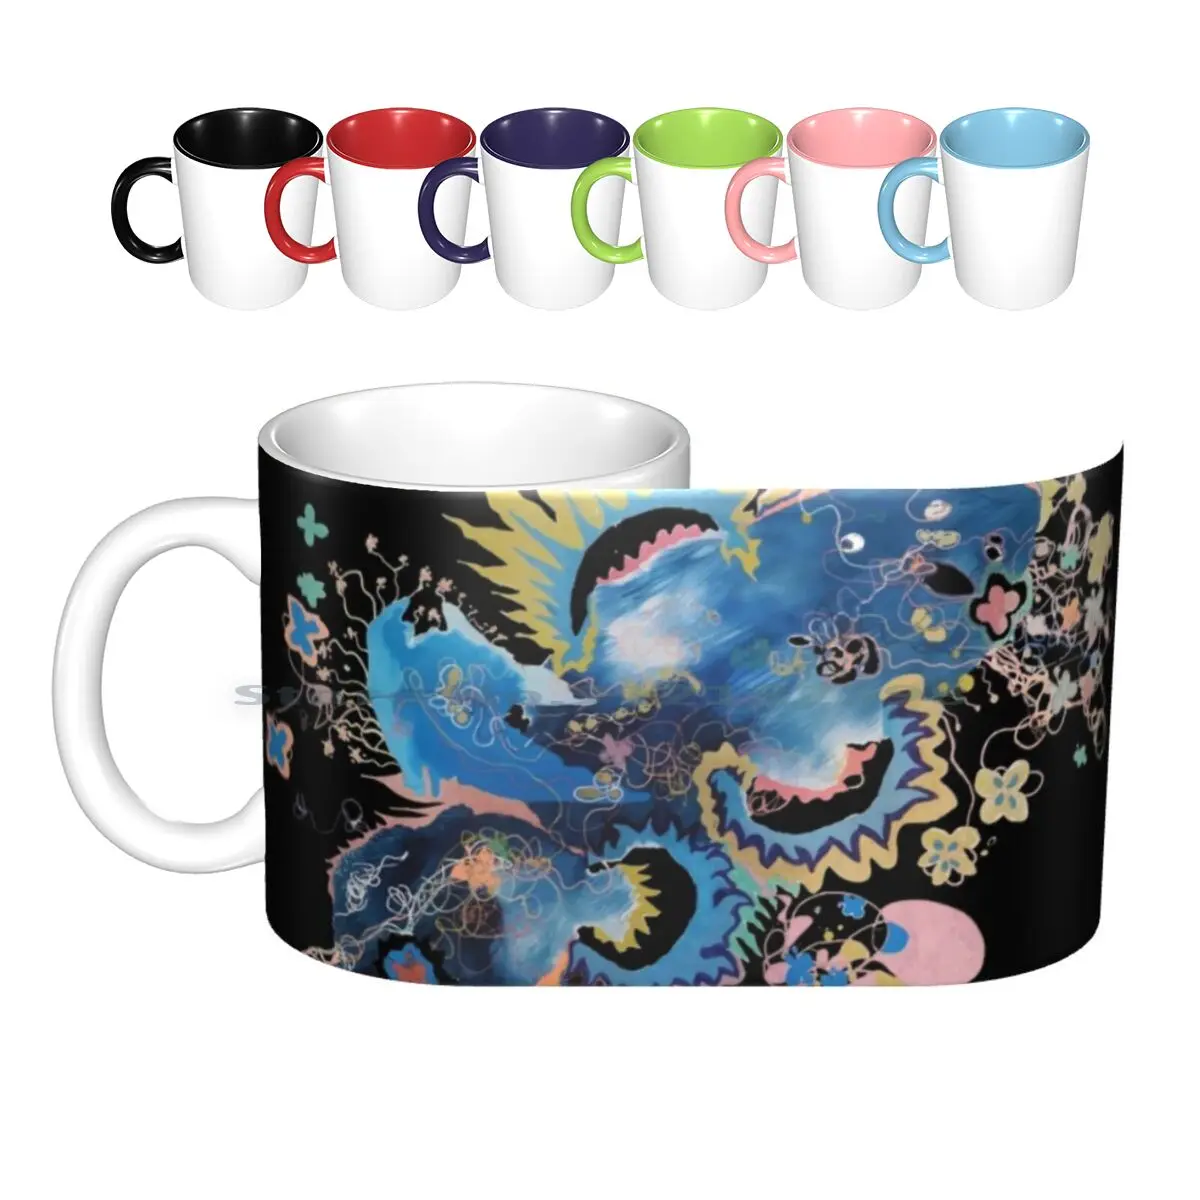 

Planet Of The Three Suns Ceramic Mugs Coffee Cups Milk Tea Mug Abstract Expression Science Fiction And Fantasy Space Opera